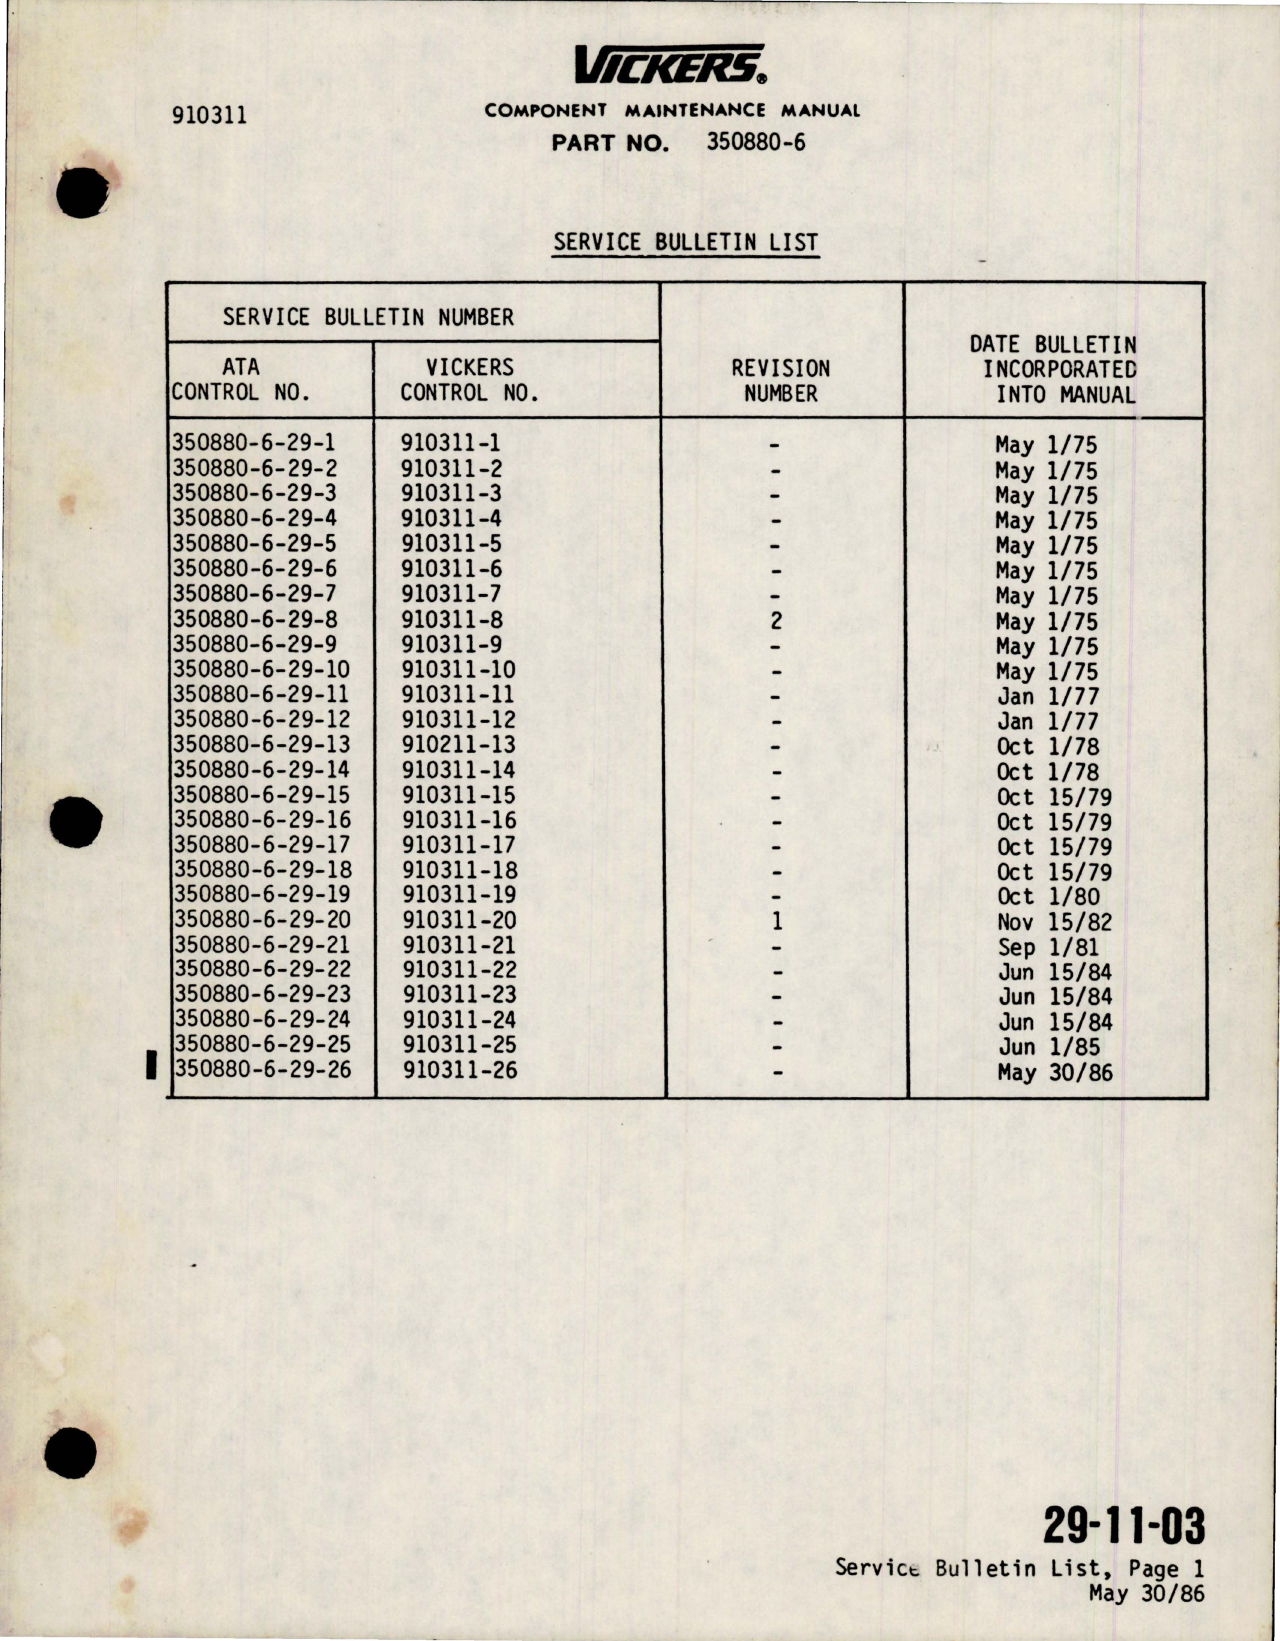 Sample page 9 from AirCorps Library document: Maintenance Manual with Parts List for Variable Displacement Hydraulic Pump - Parts 350880-6 and 623272